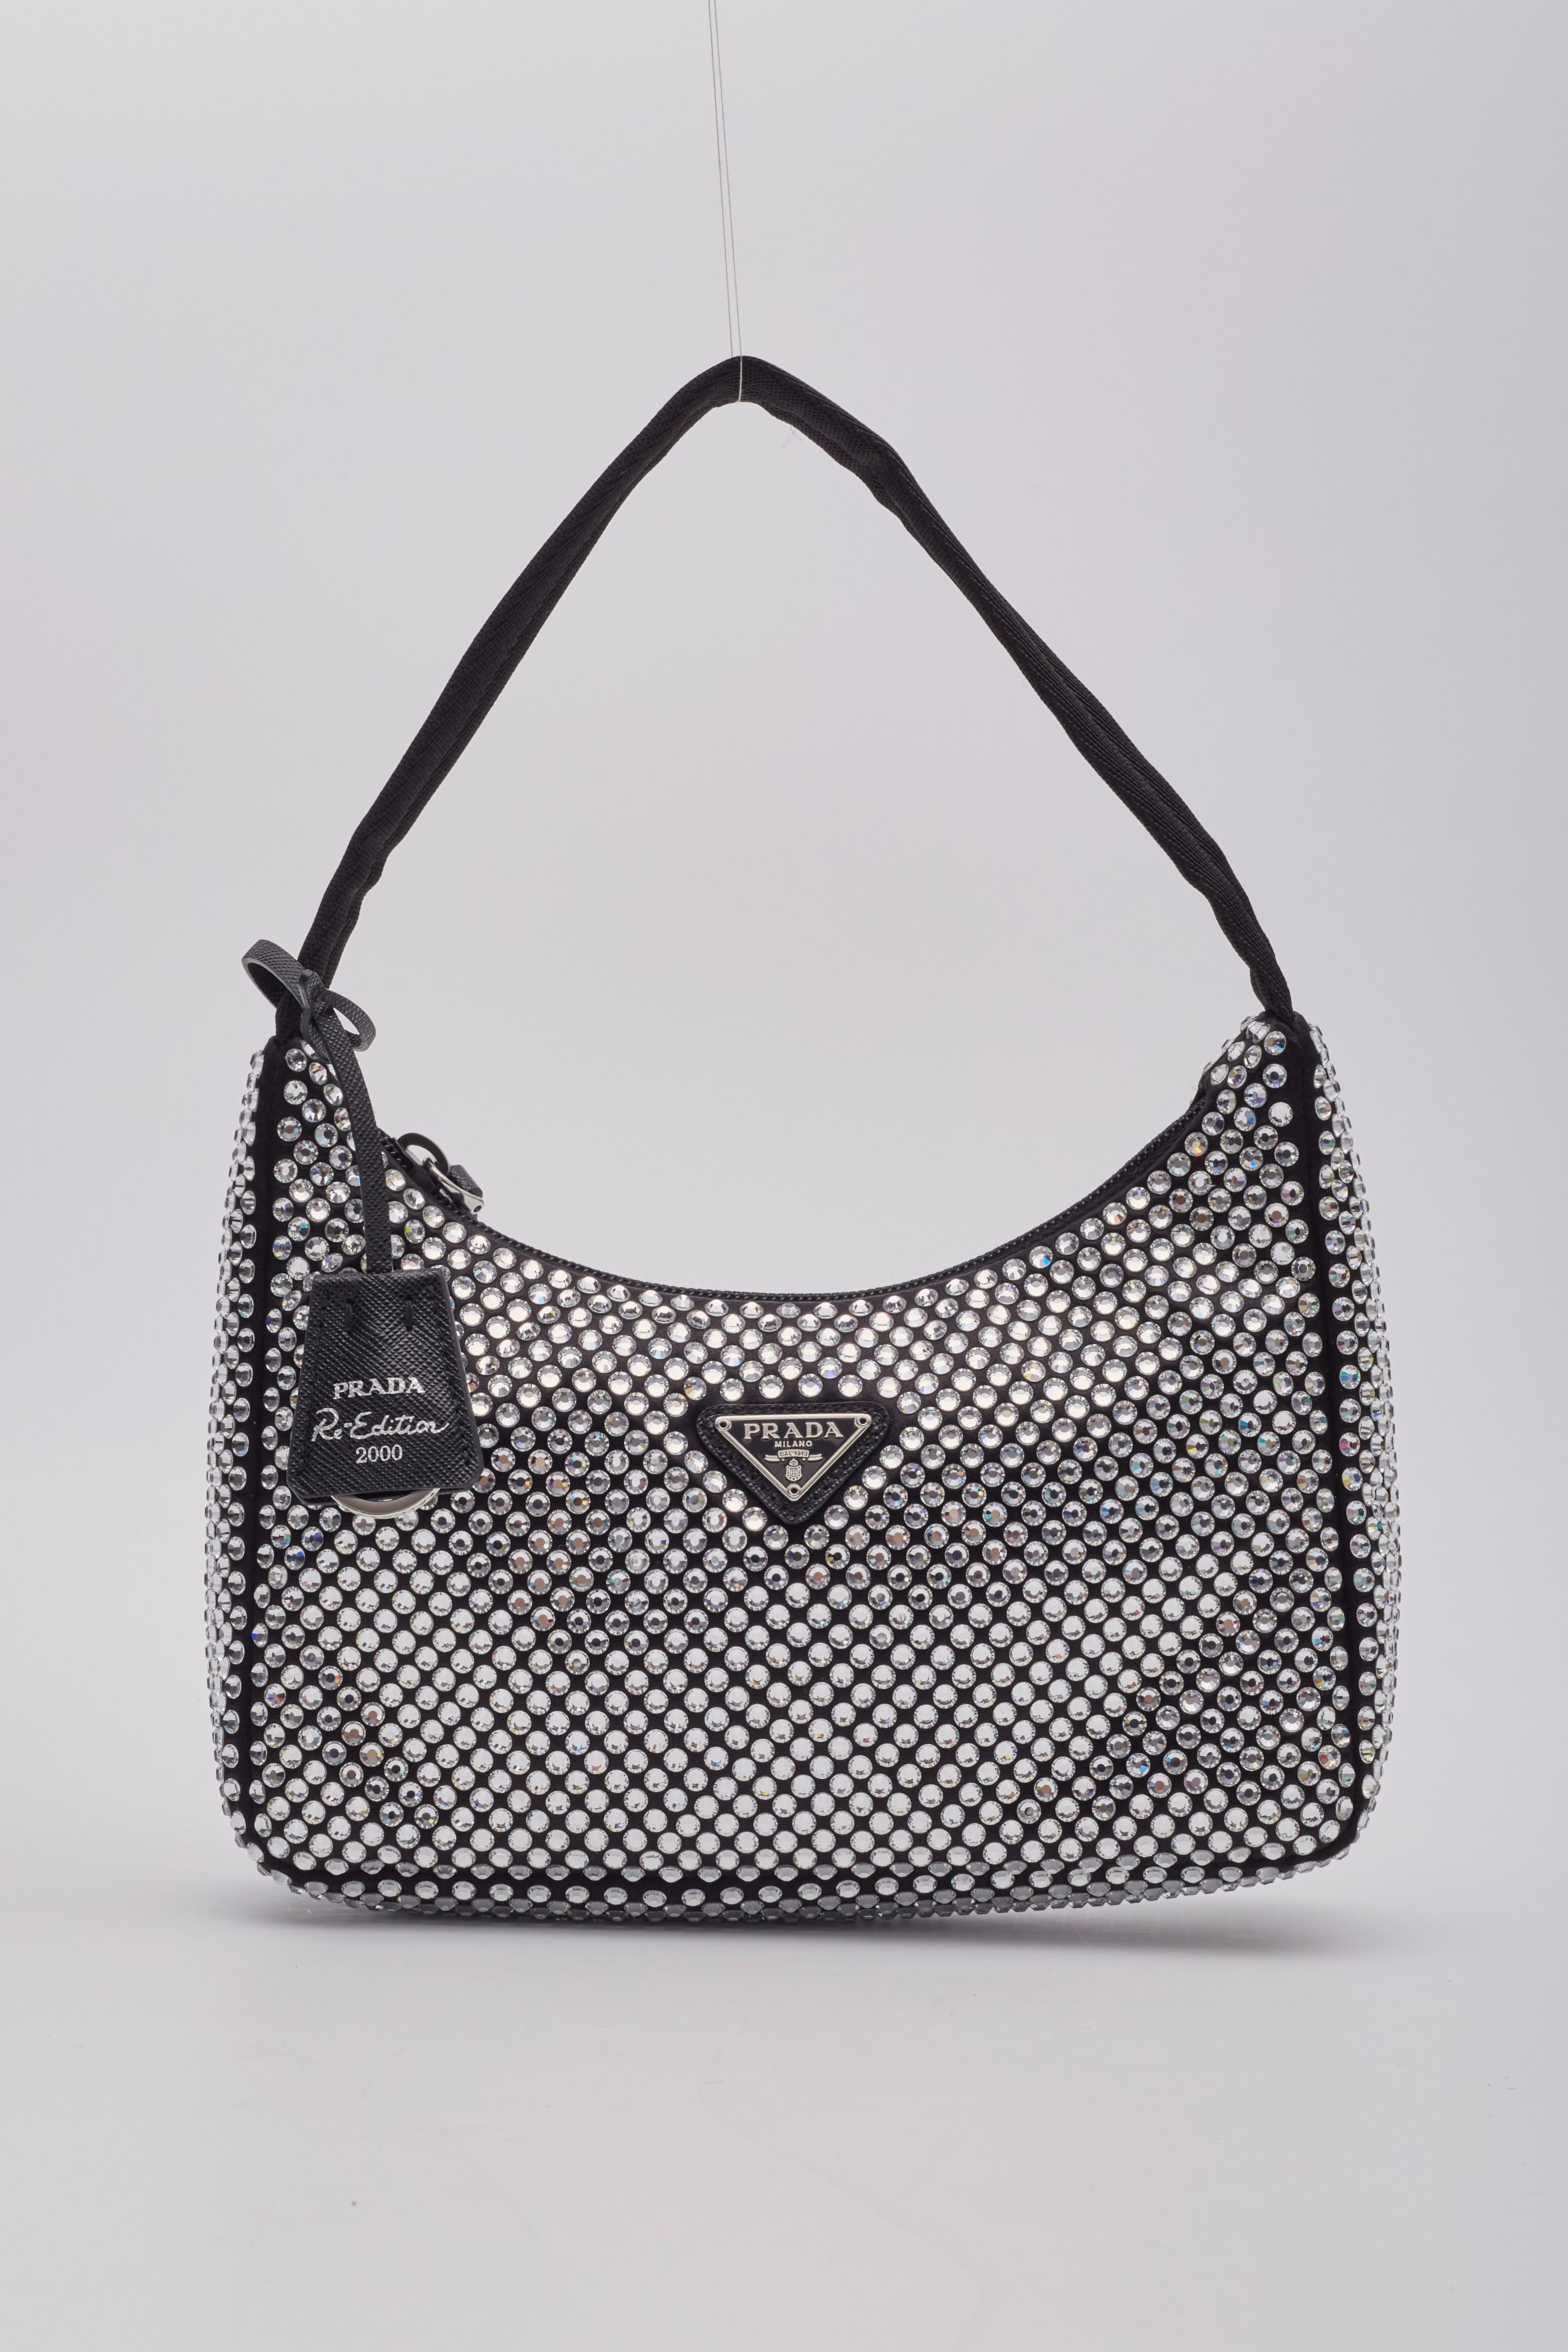 Prada Black Satin Crystal Mini Re-edition 2000 Bag In Excellent Condition For Sale In Montreal, Quebec